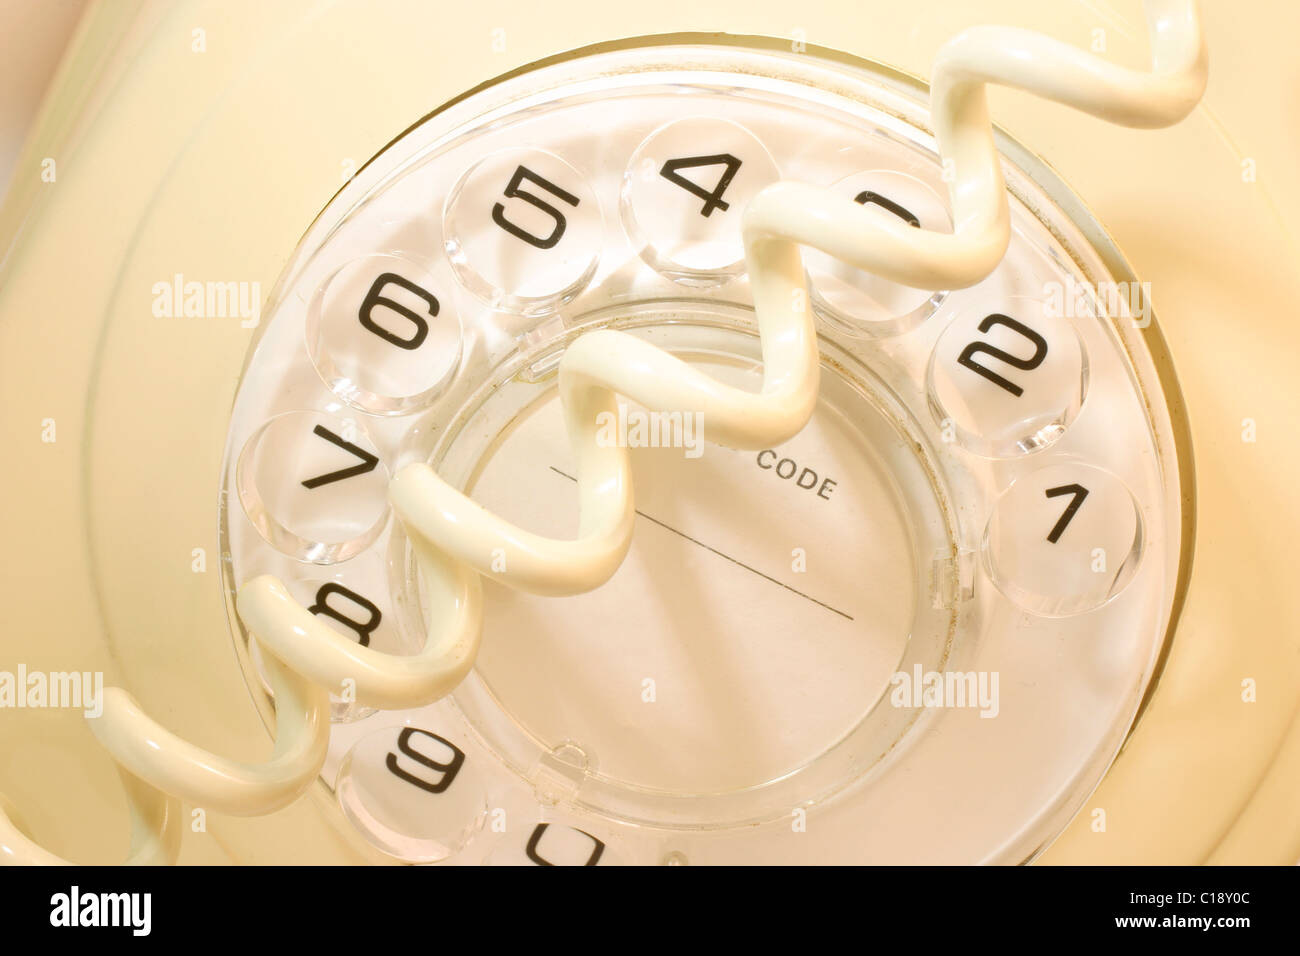 Telephone dial and cable, old-fashioned Stock Photo